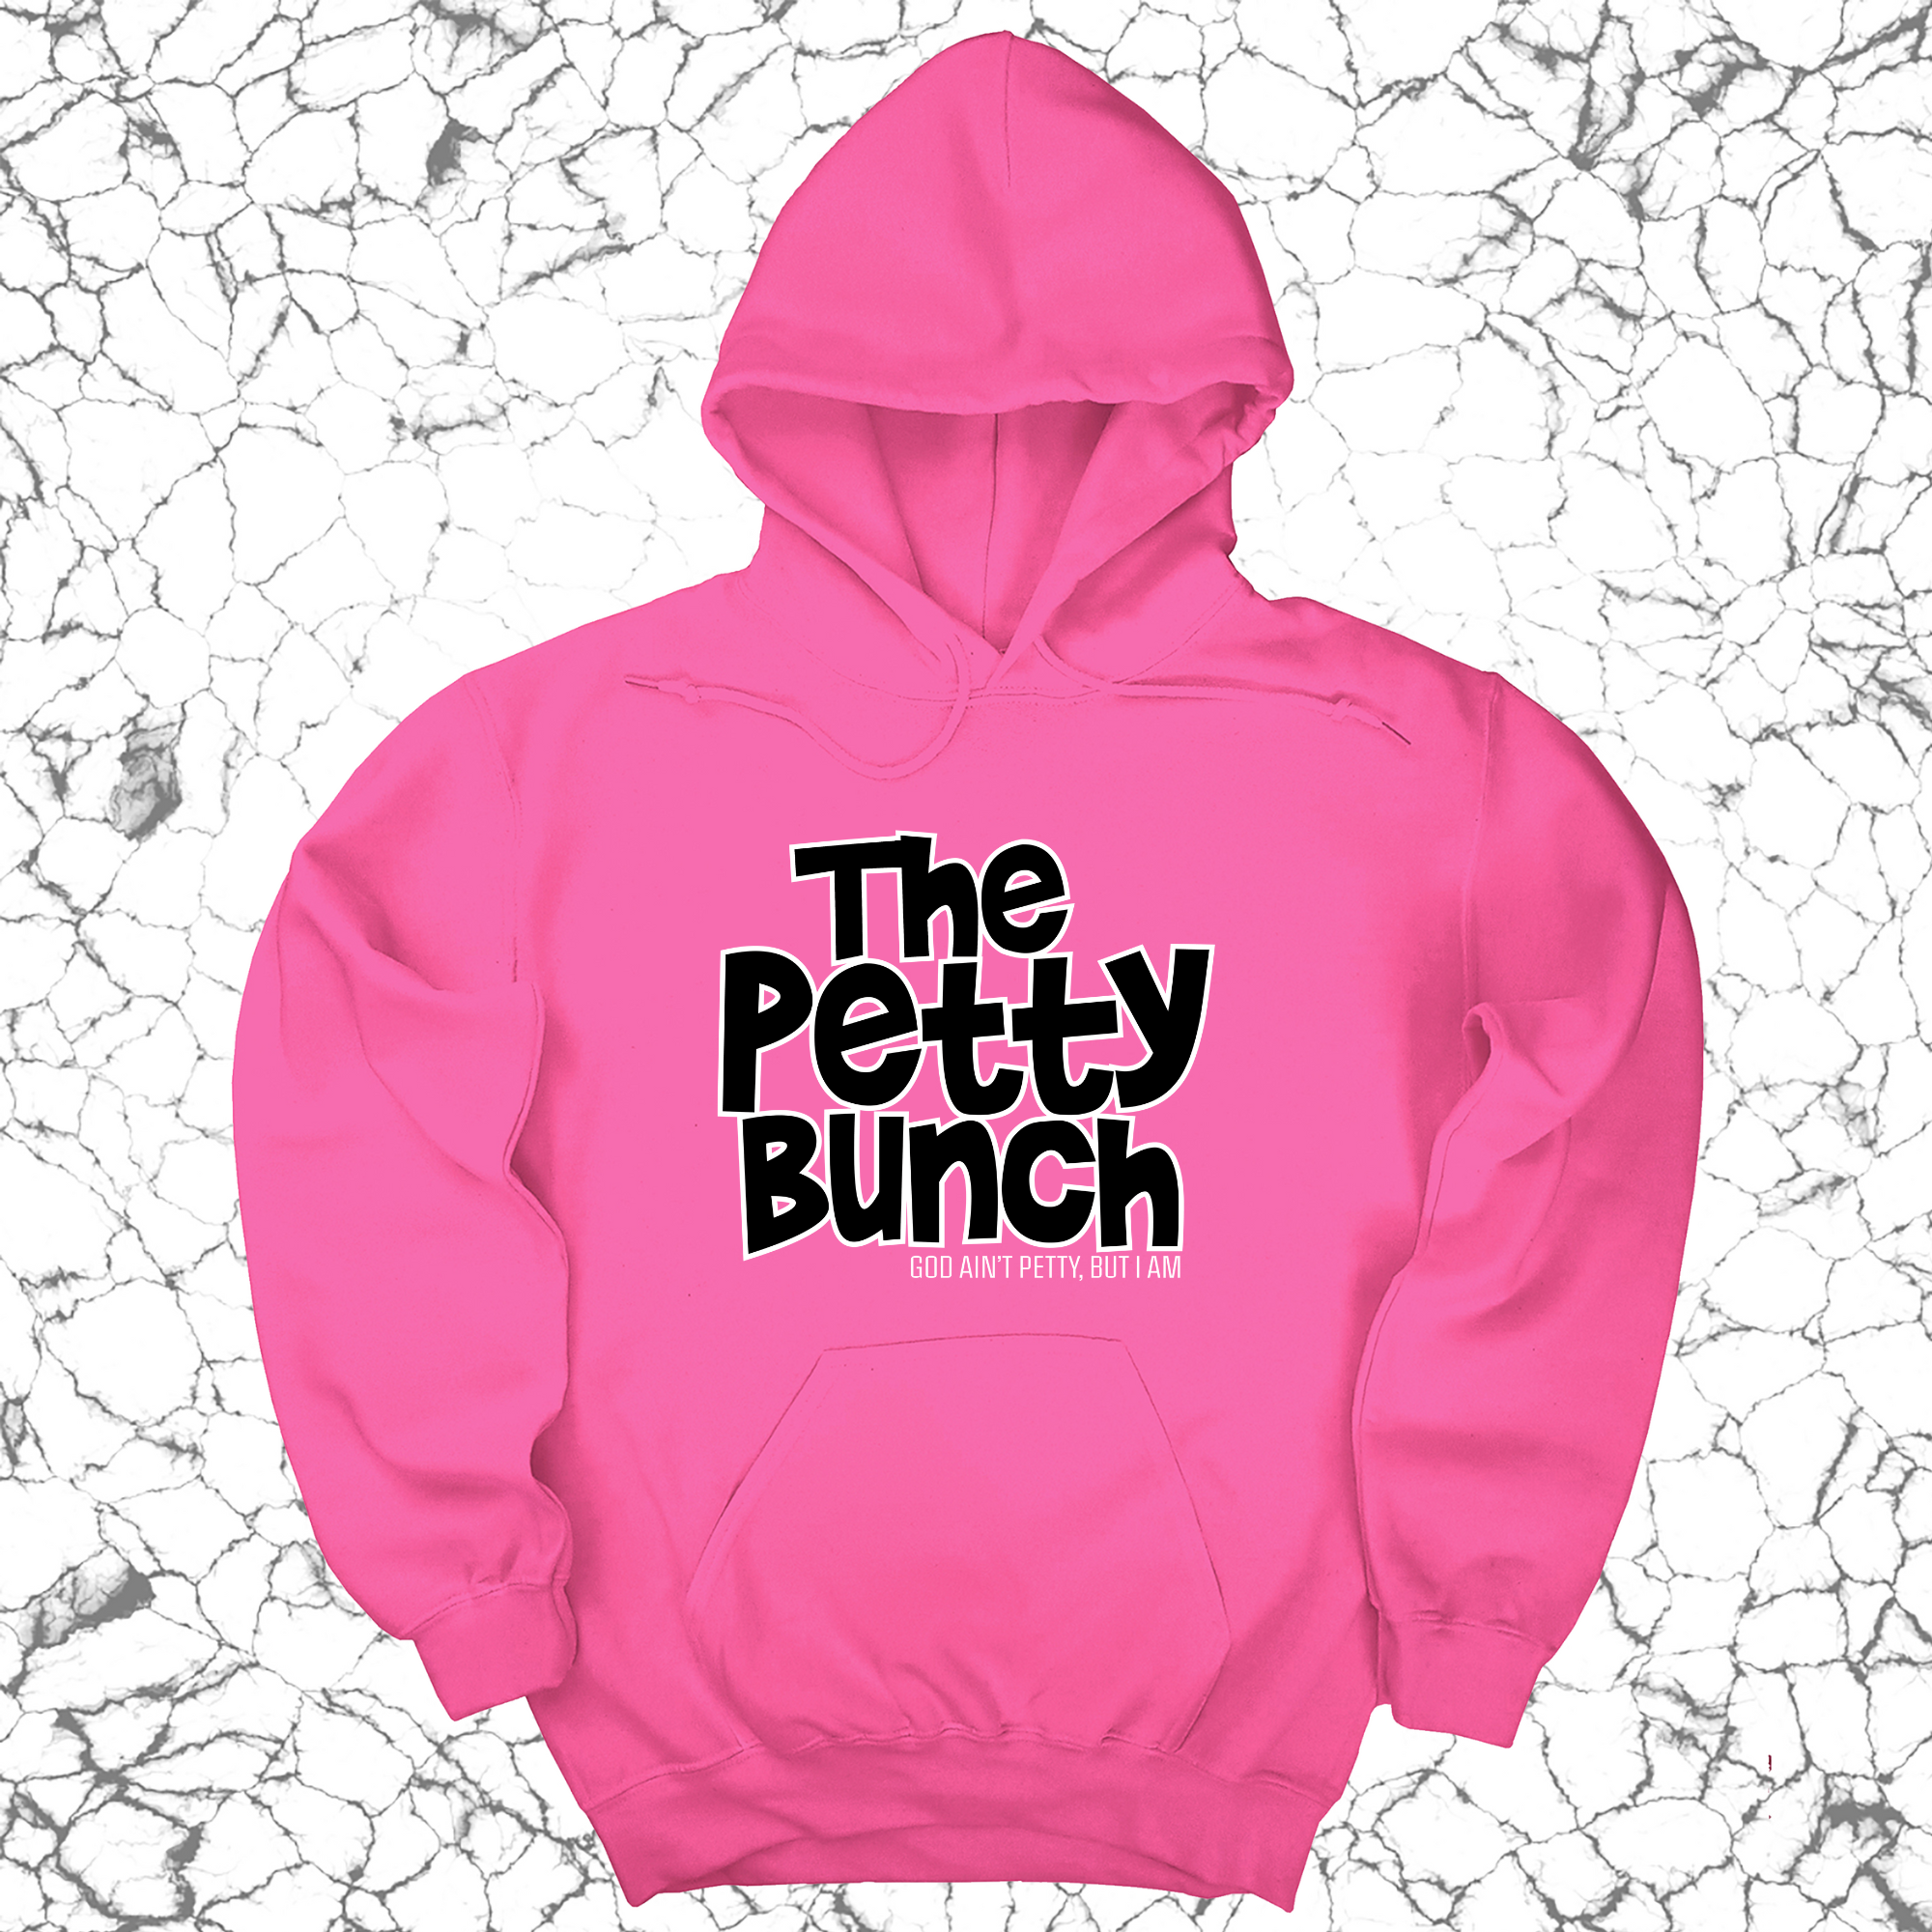 The Petty Bunch Unisex Hoodie-Hoodie-The Original God Ain't Petty But I Am